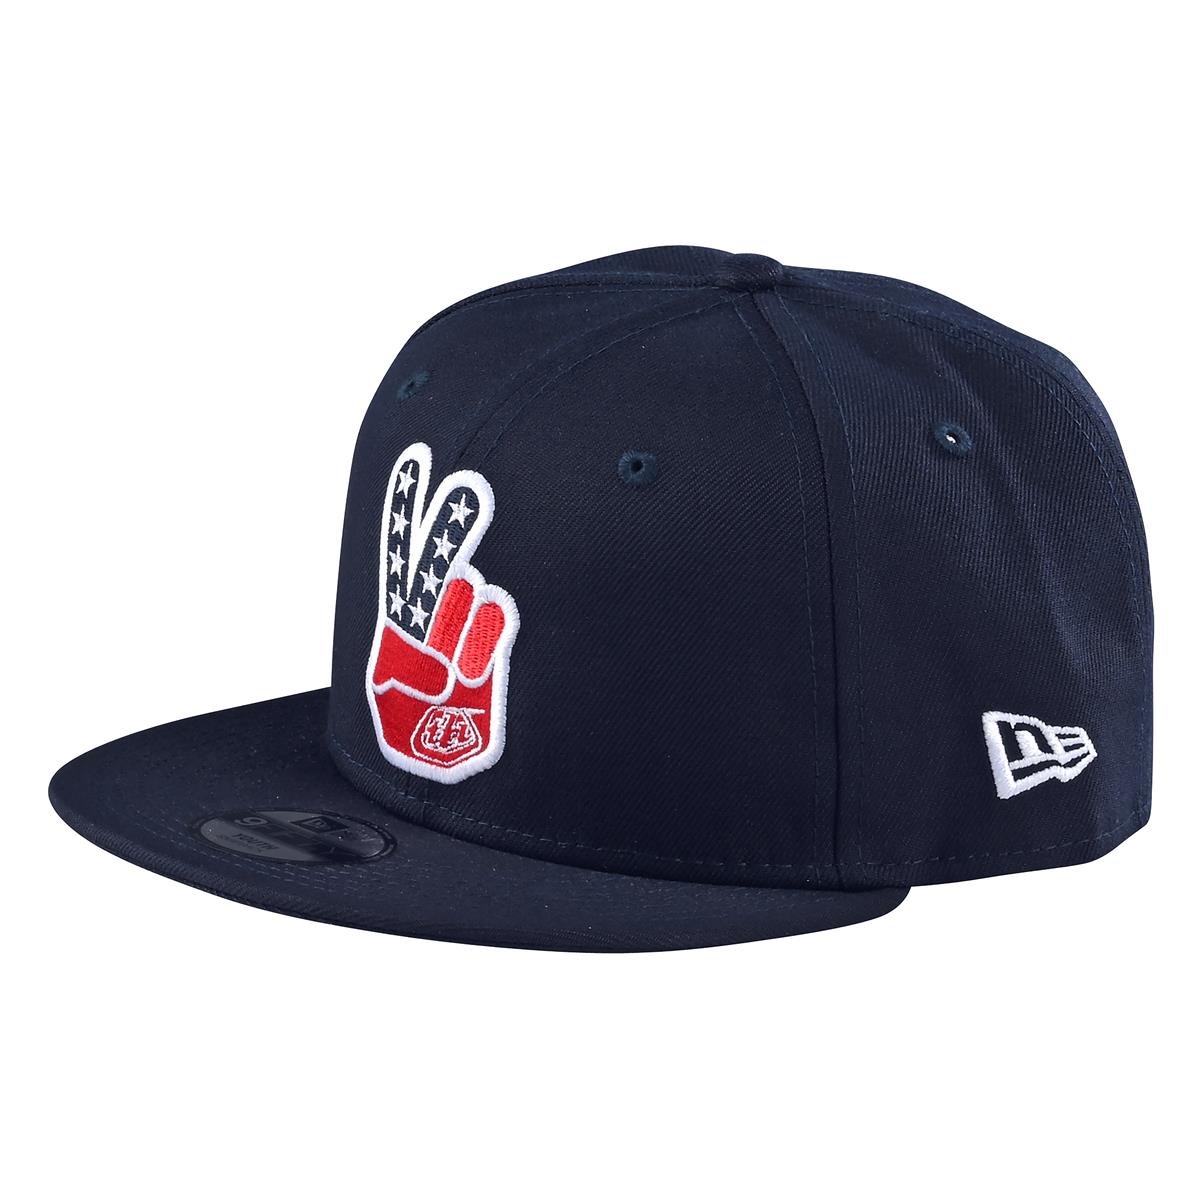 Troy Lee Designs Cappellino Snap Back Peace Sign Navy